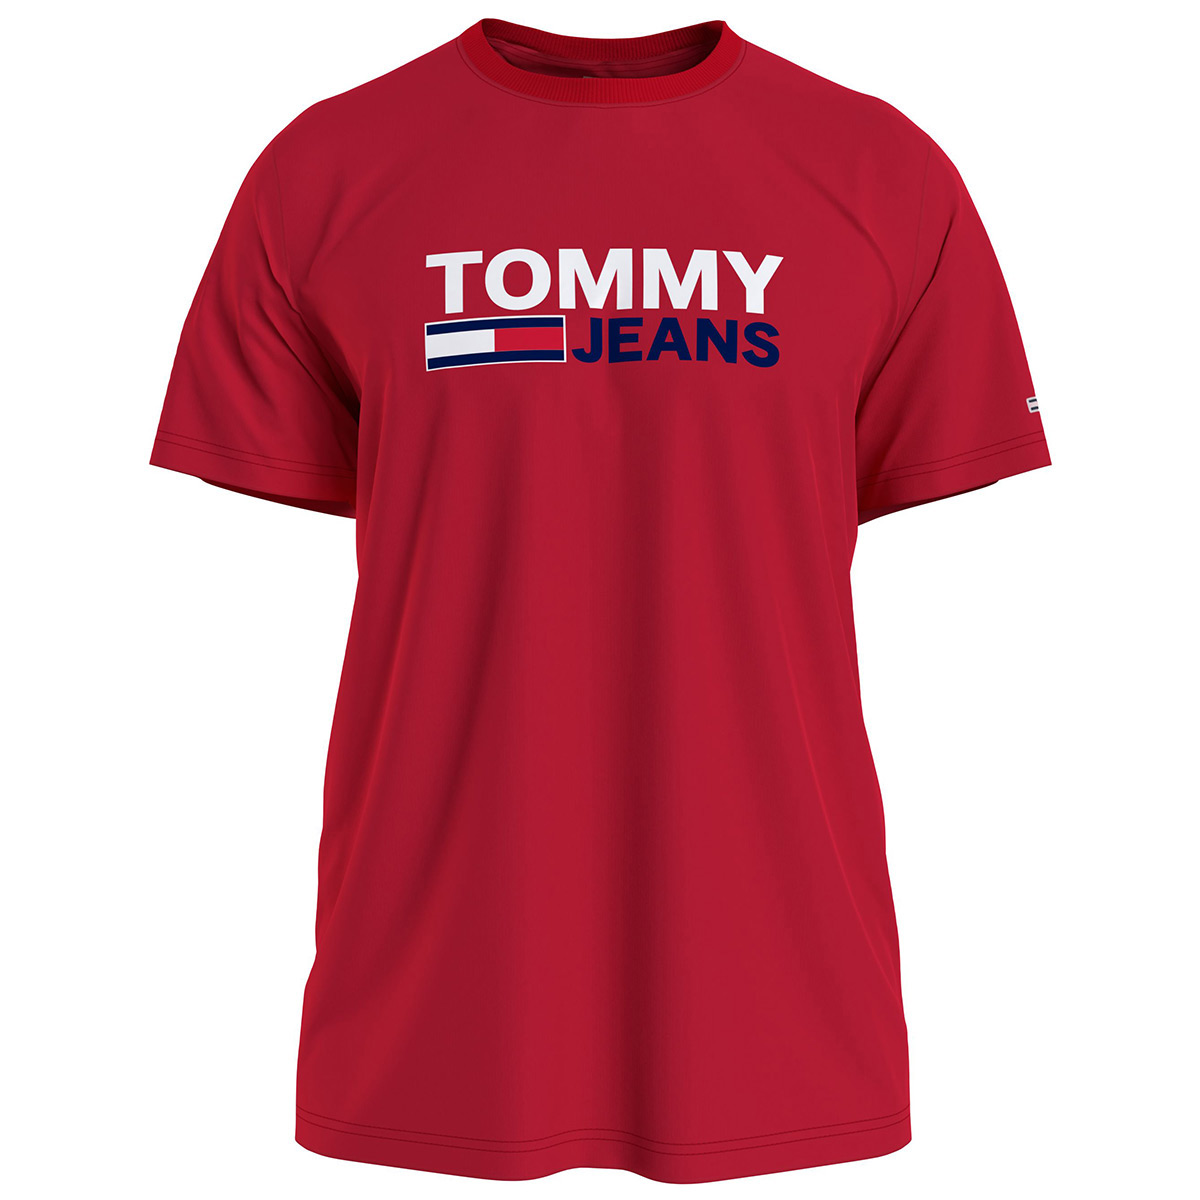 Tommy Hilfiger "Corp Logo Tee"